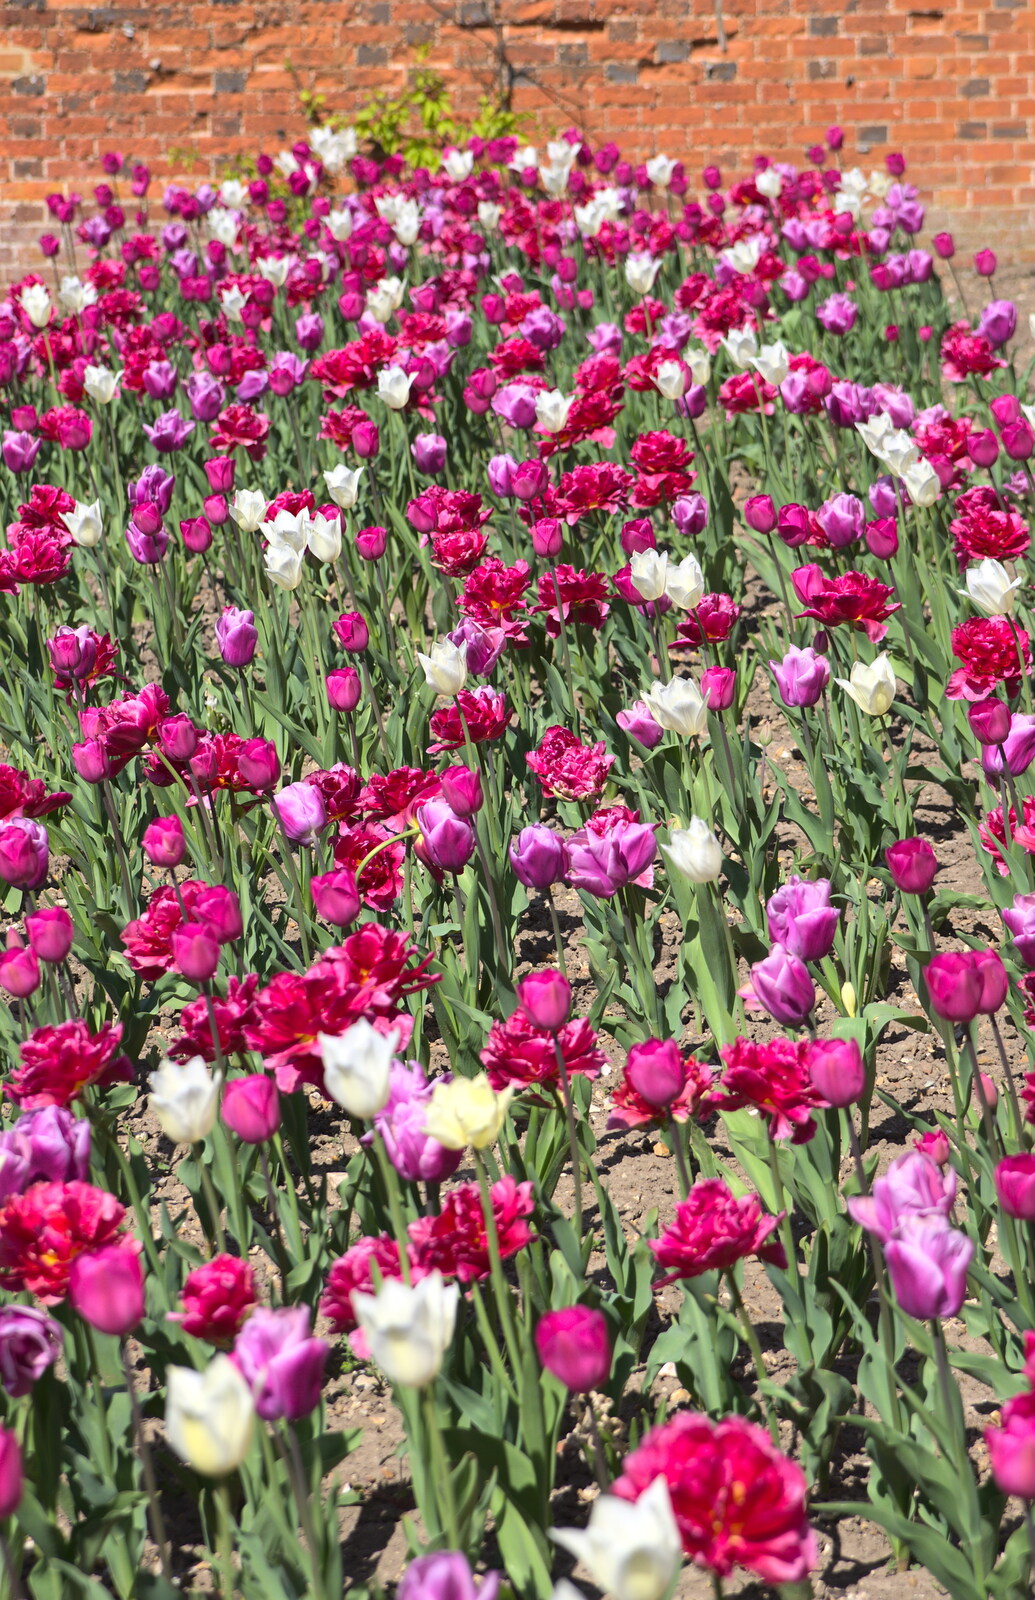 A bed of vivid tulips from A Trip to Audley End House, Saffron Walden, Essex - 16th April 2014